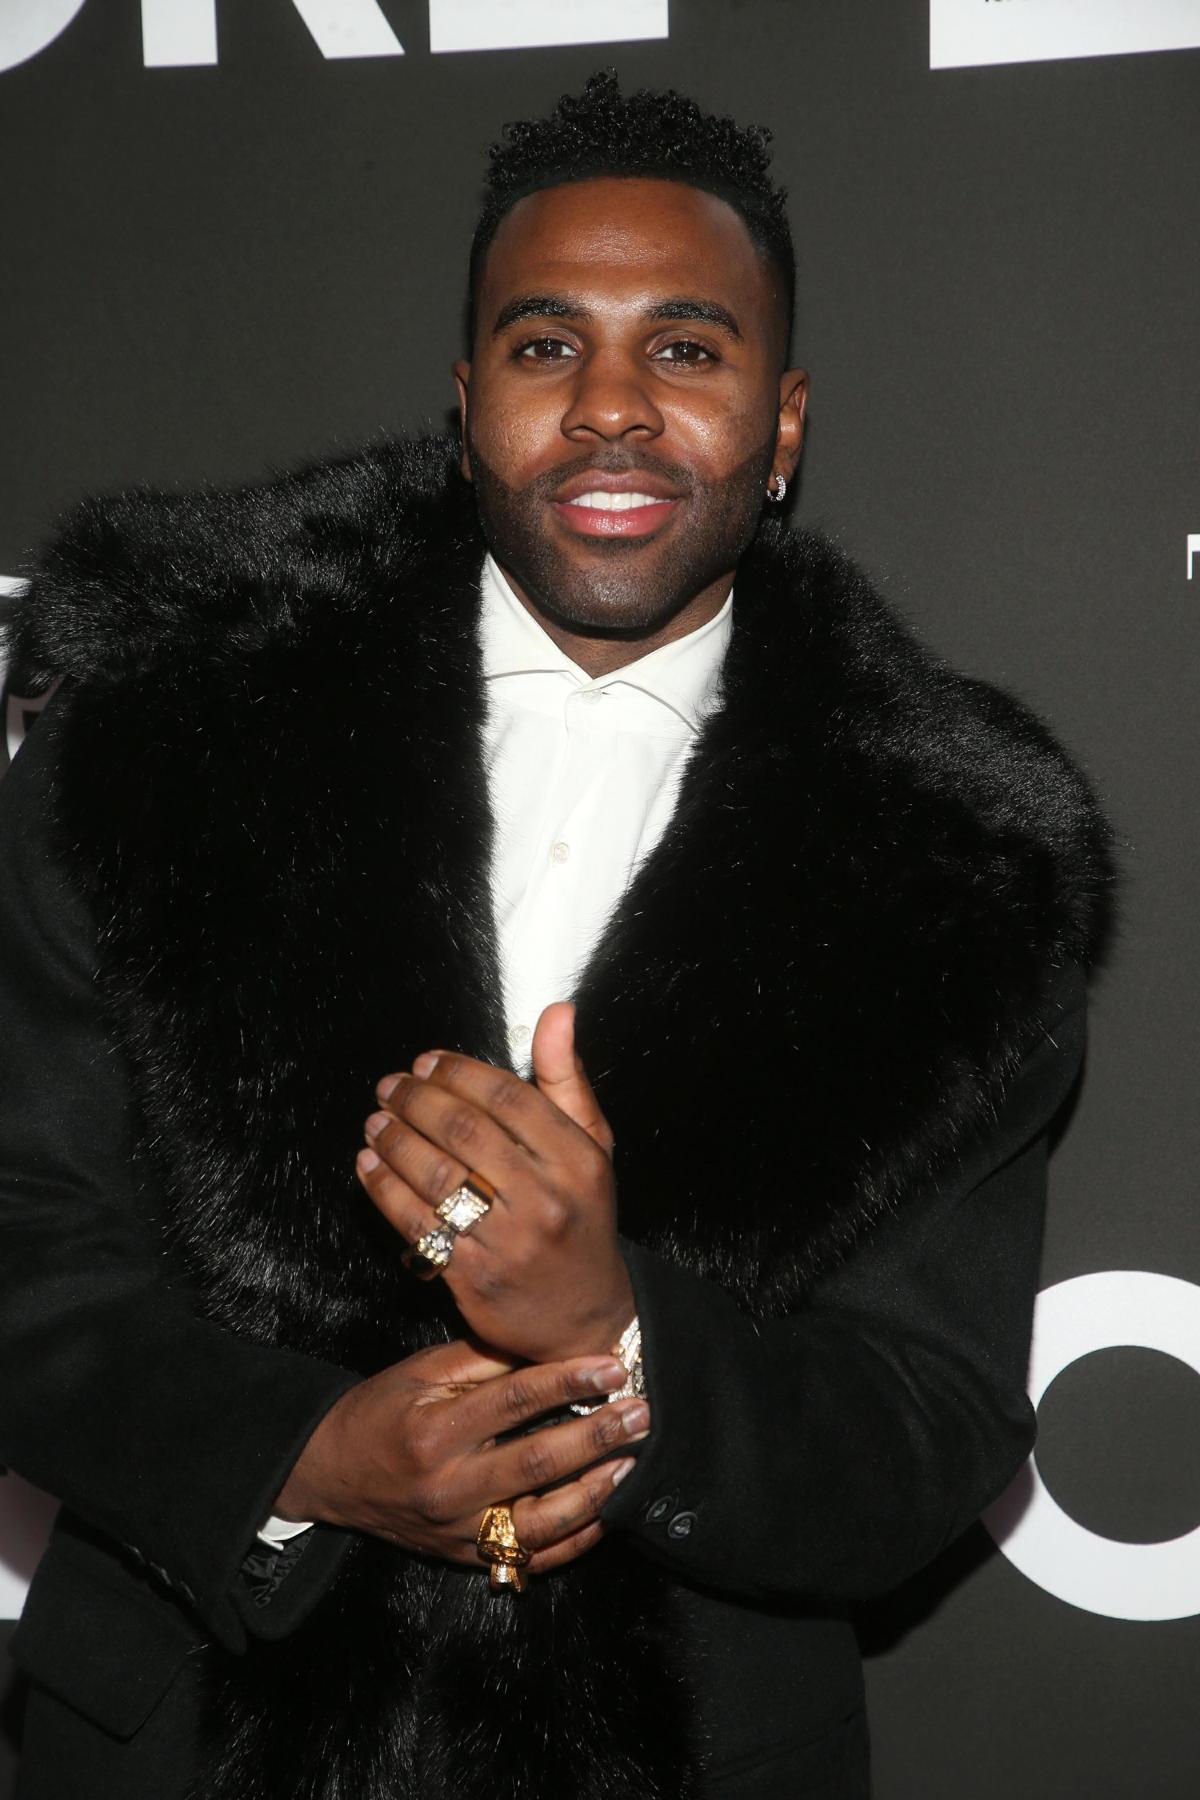 Jason Derulo Faces Sexual Harassment Lawsuit for Allegedly Coercing Singer into Sexual Relationship